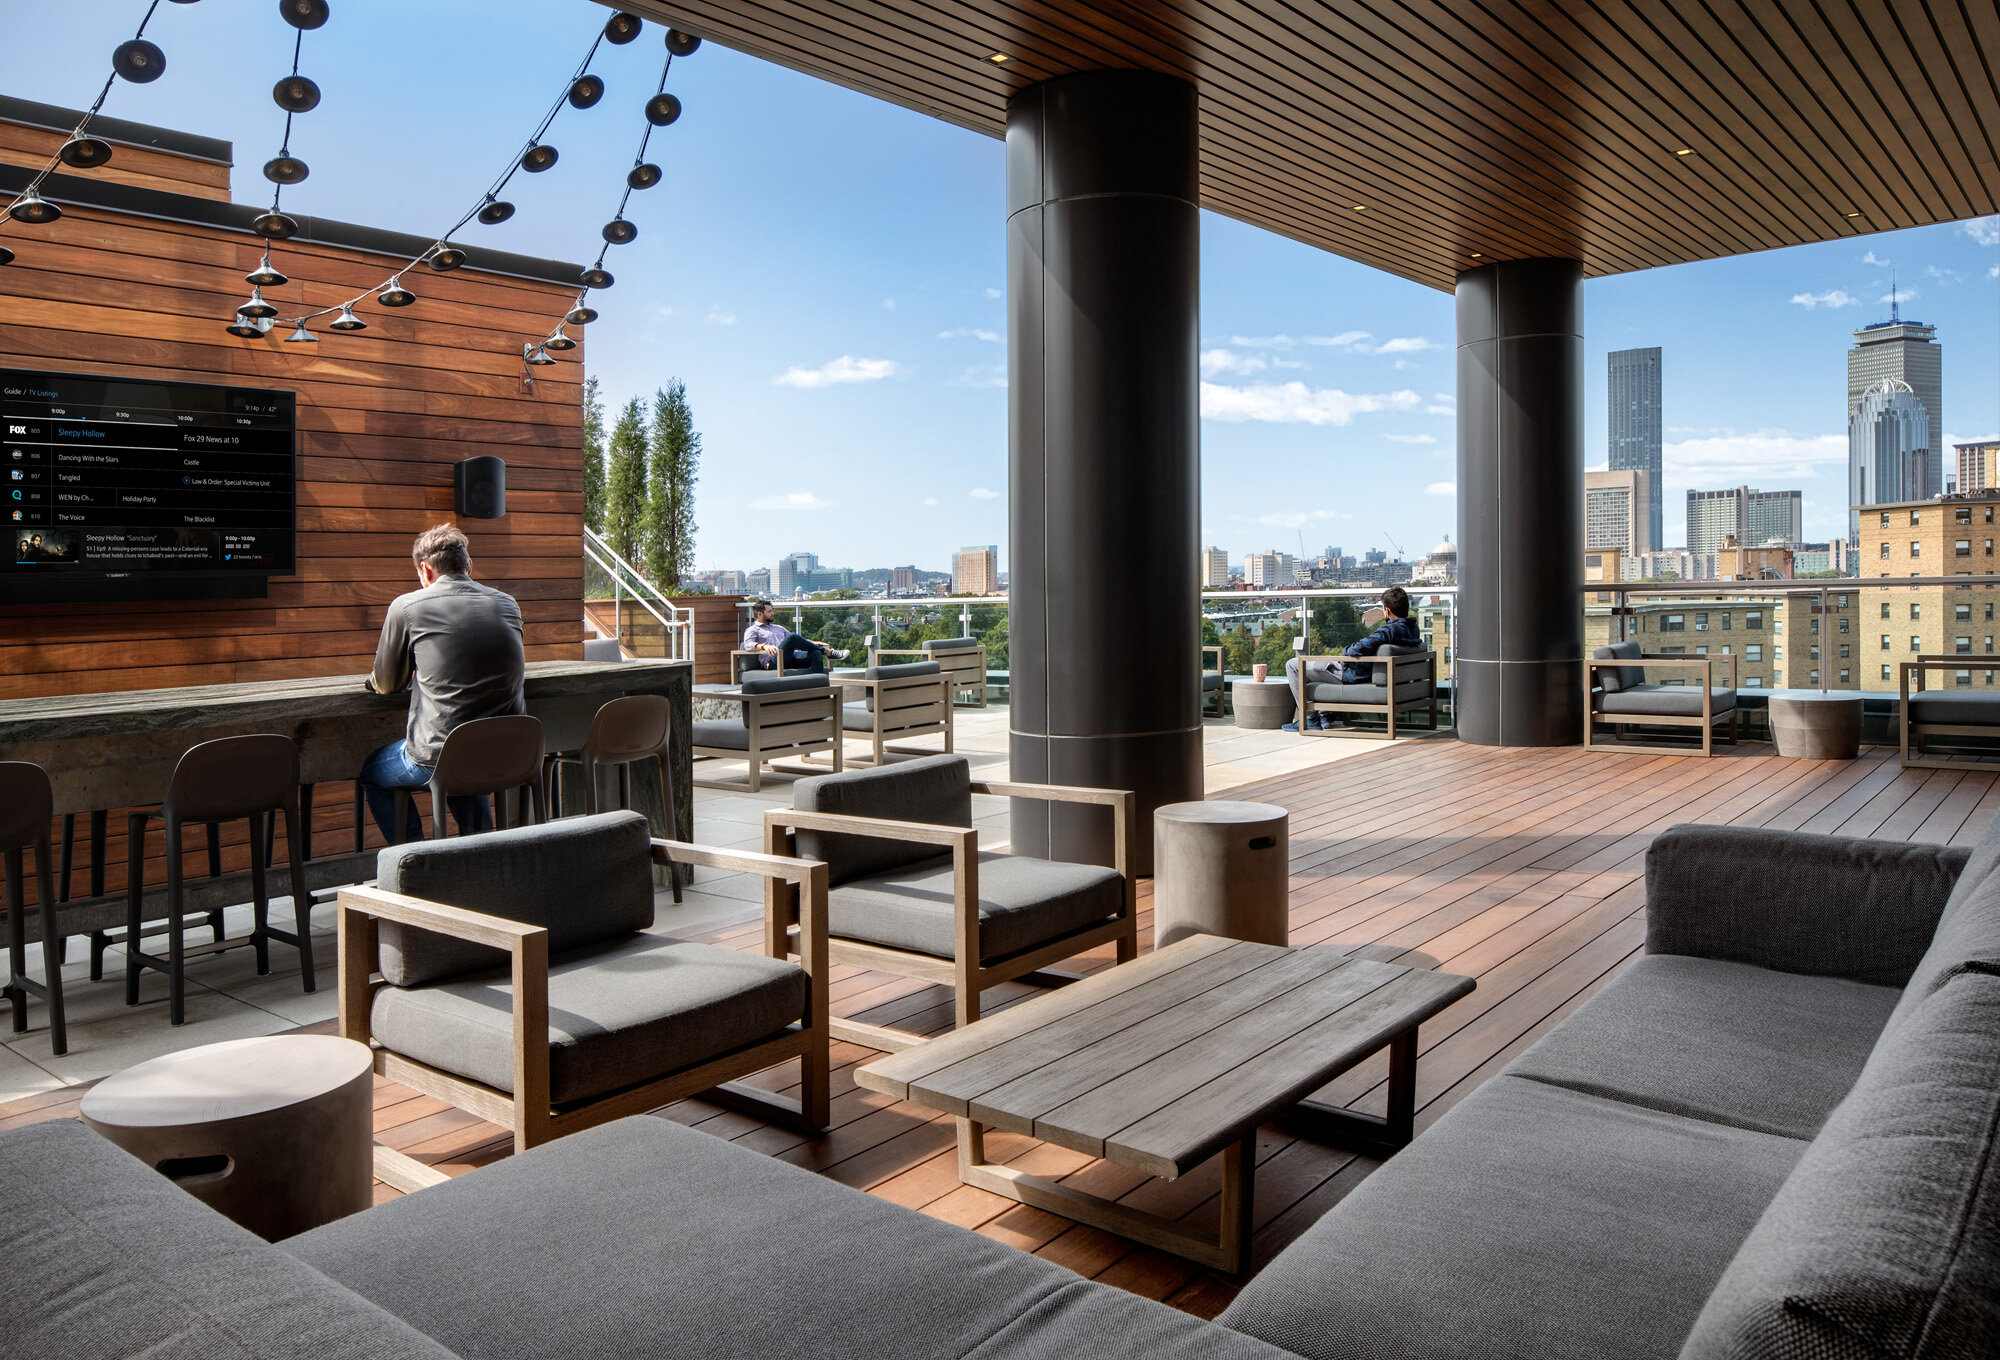 Bar seating on The Smith amenity deck (photo by Ed Wonsek)